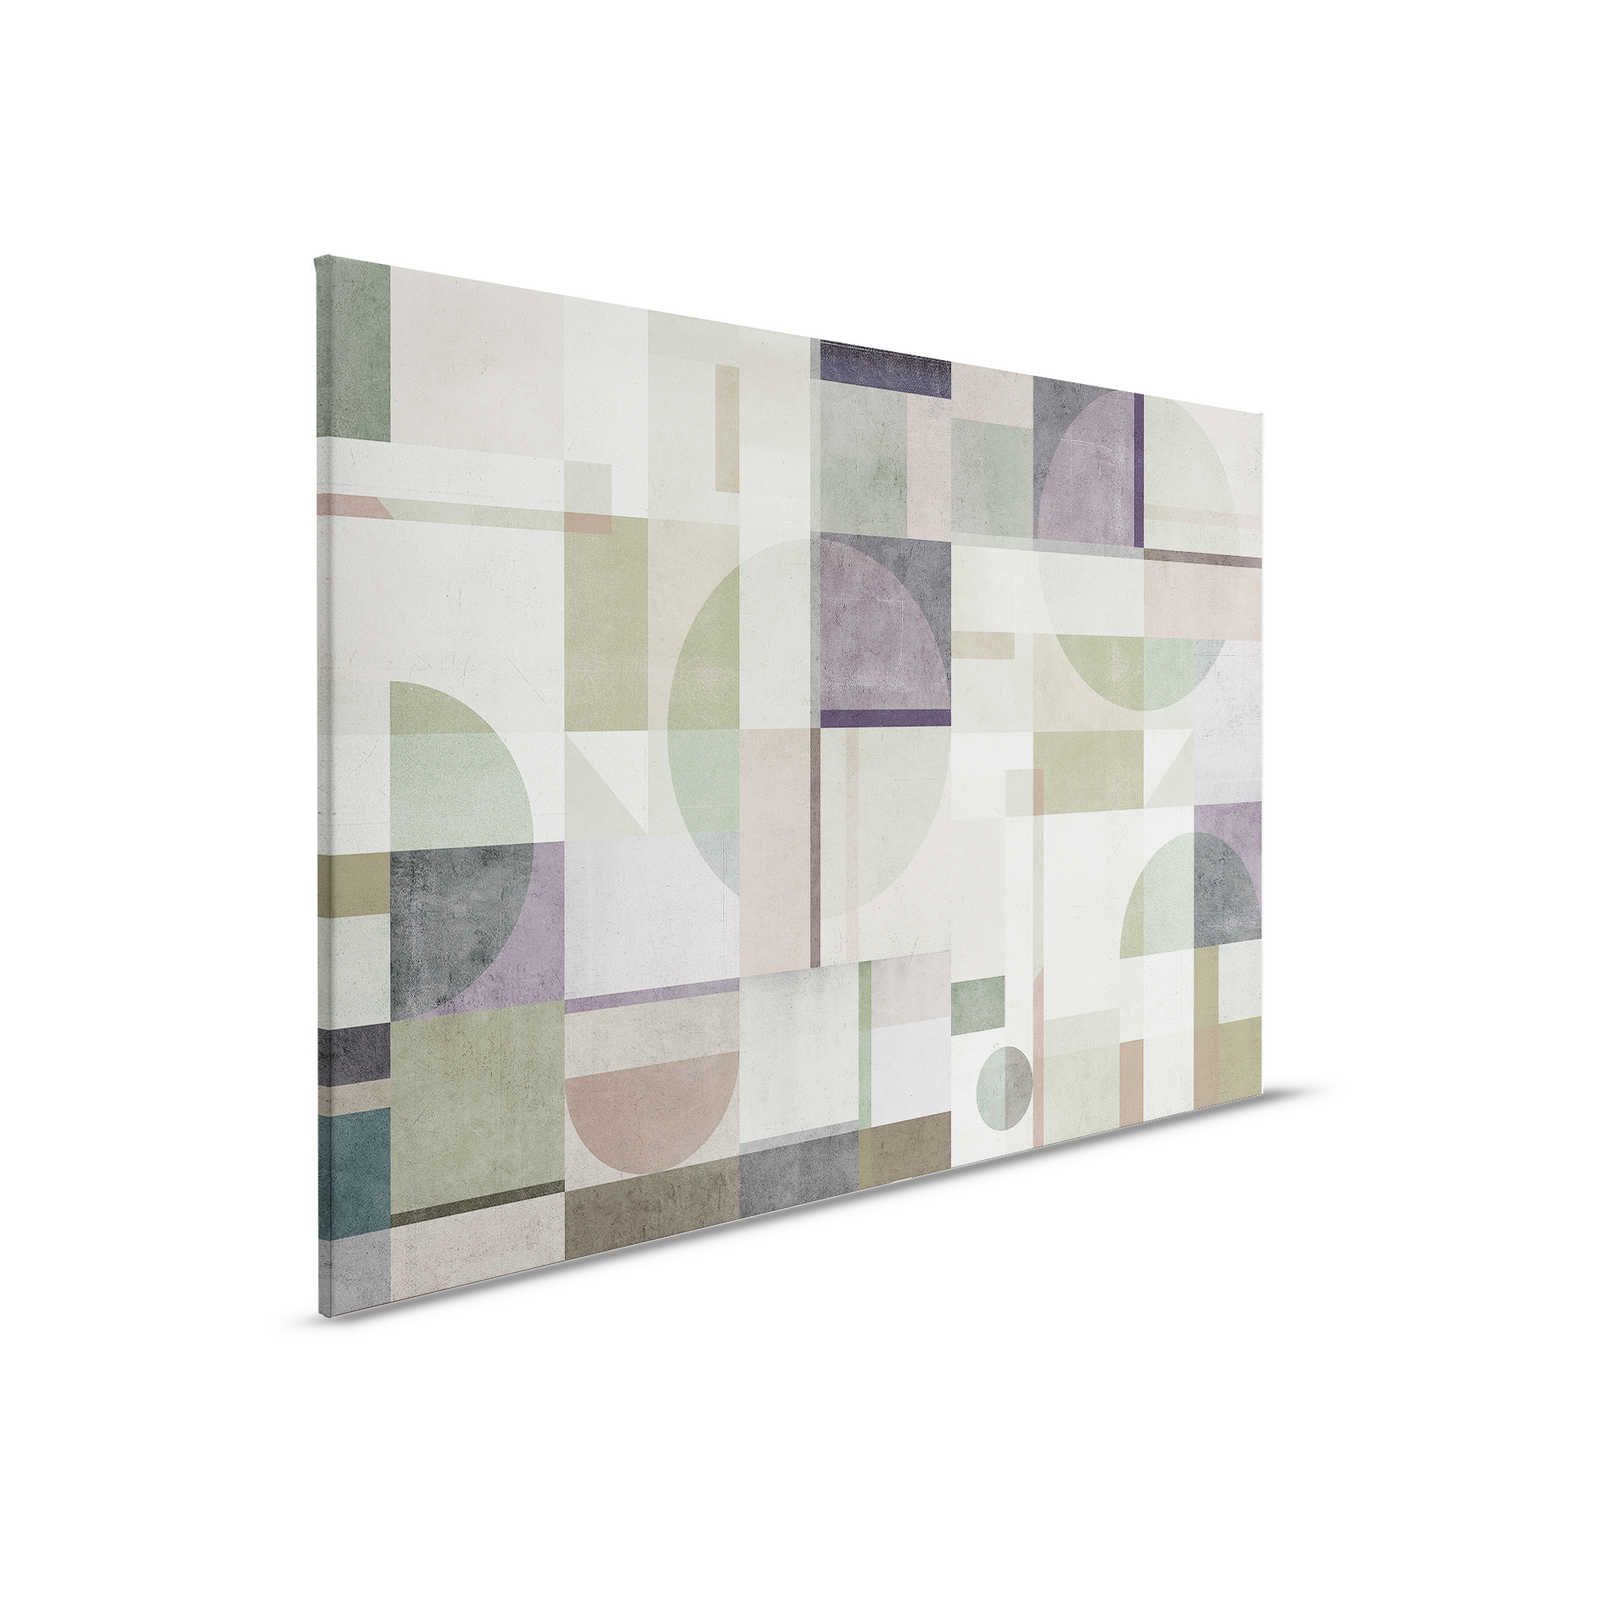         Piazza 1 - Concrete Look Canvas Painting Green & Grey with Graphic Pattern - 0.90 m x 0.60 m
    